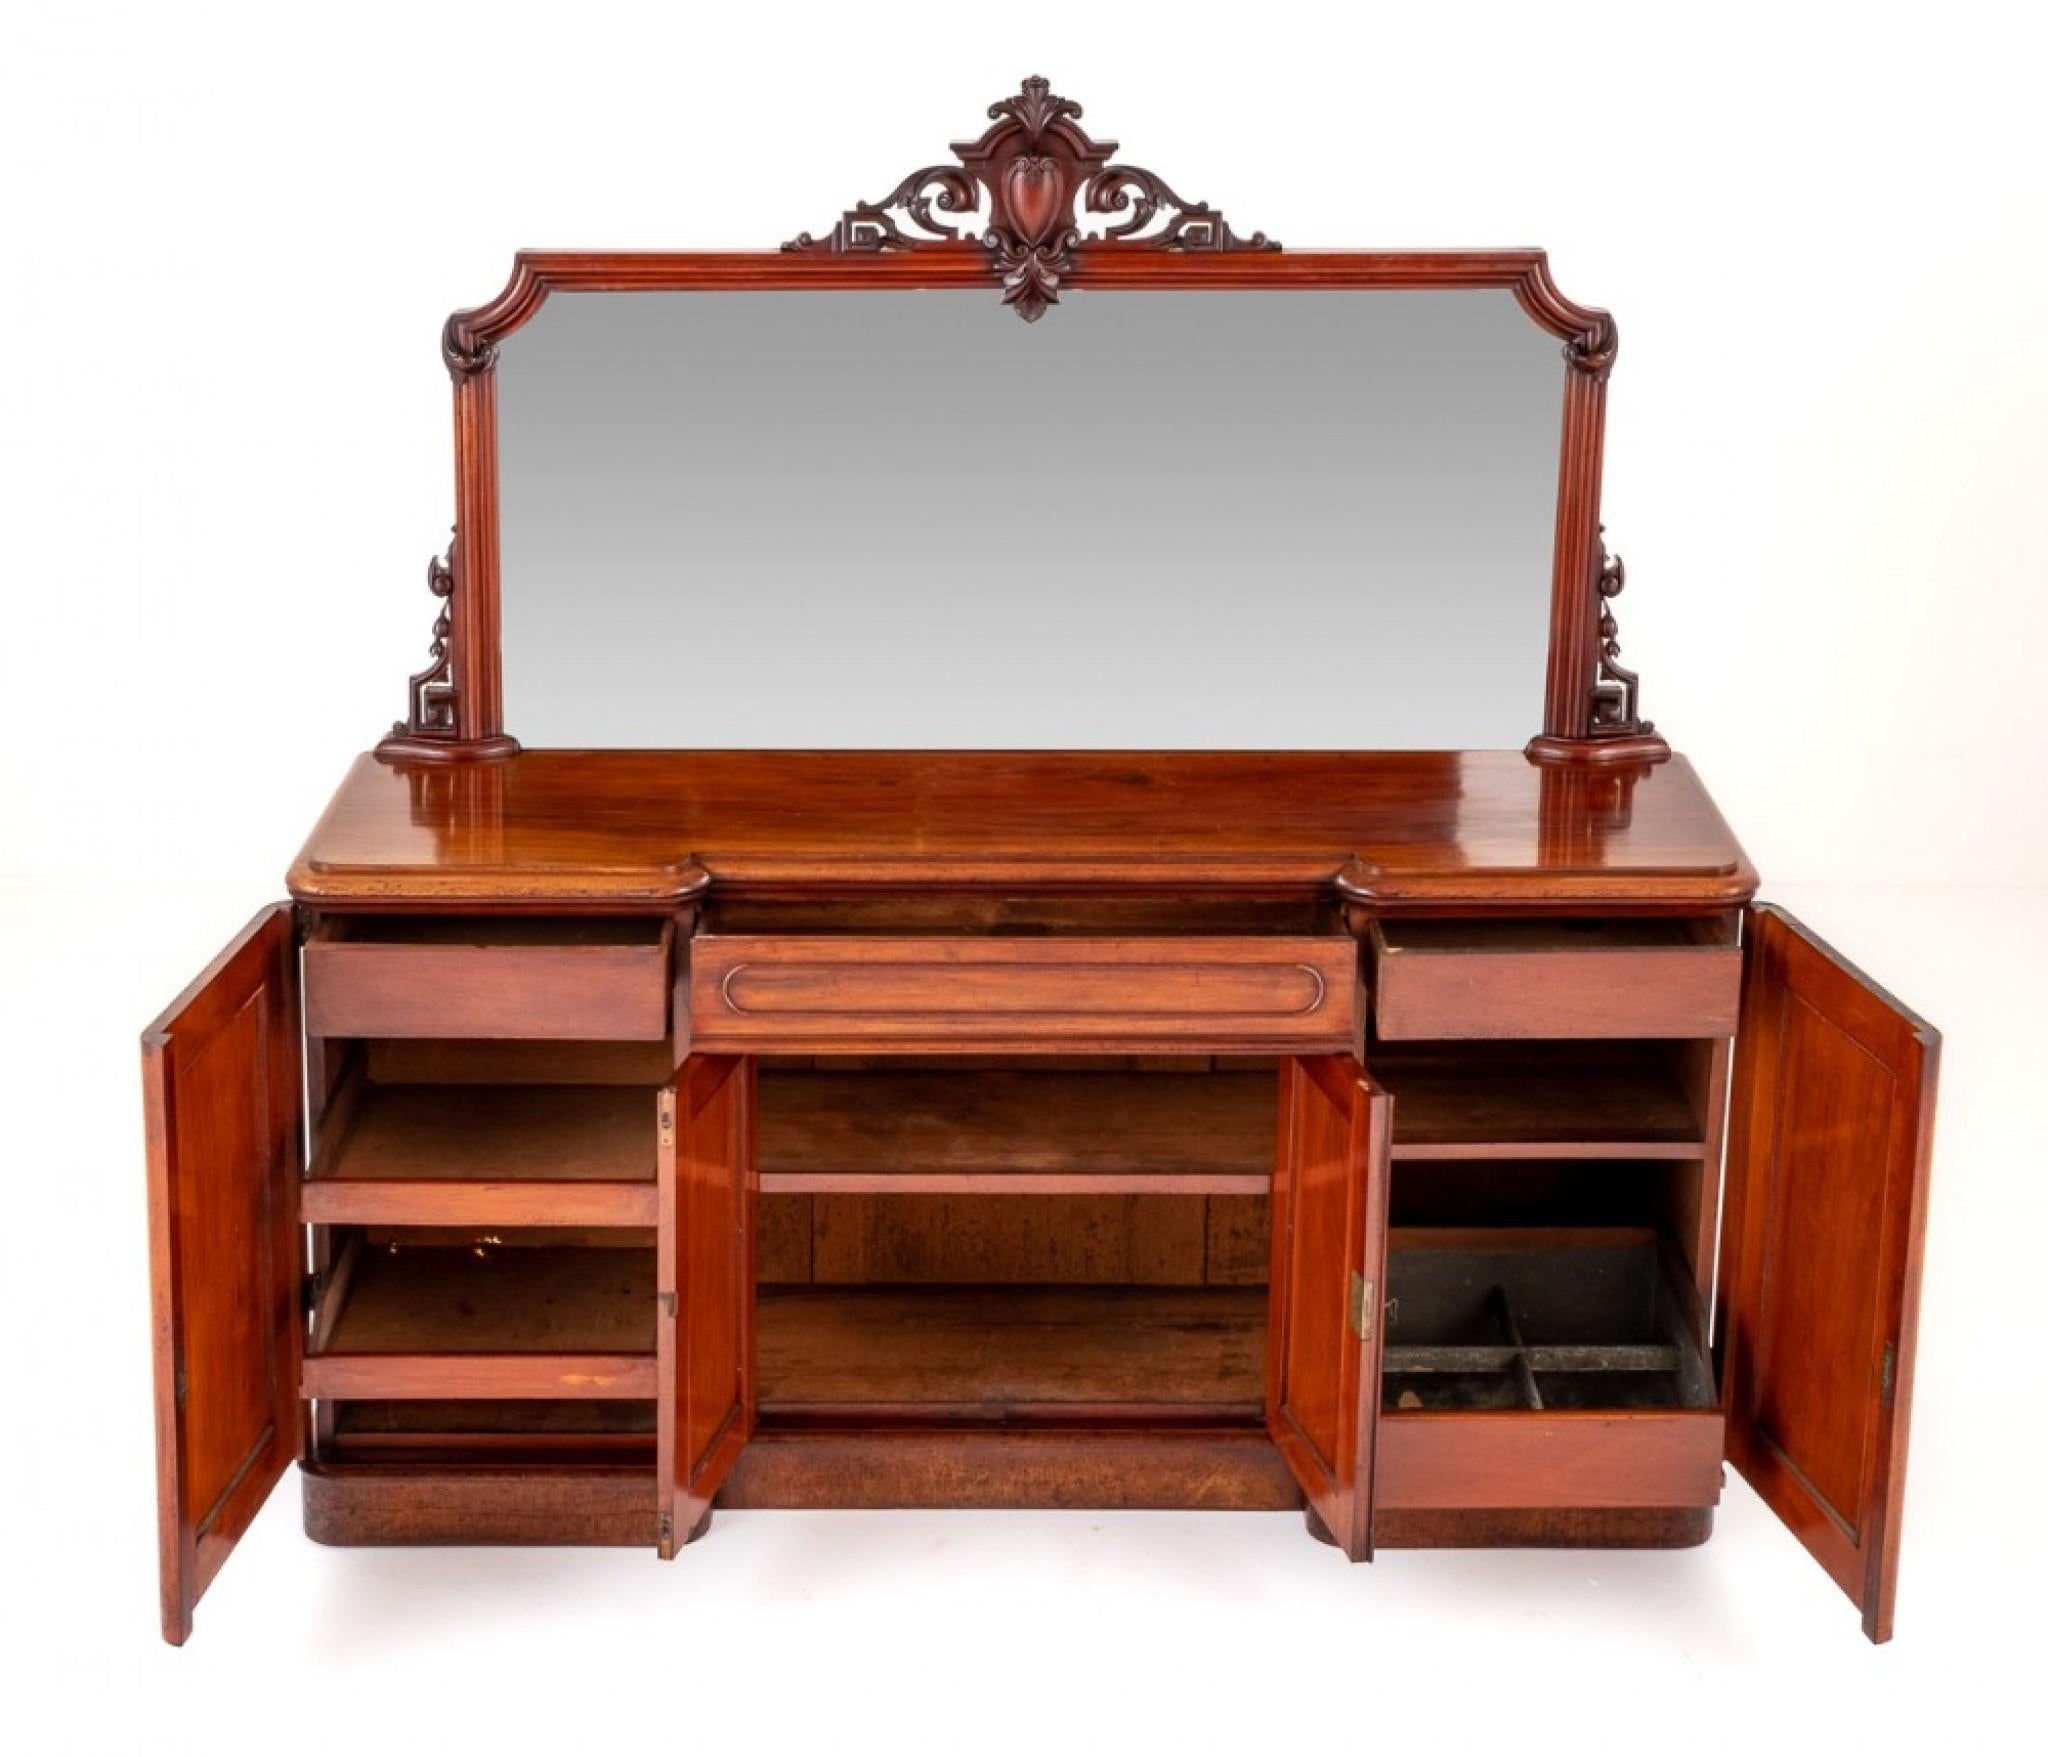 Victorian Mahogany Sideboard Antique Server, 1860 For Sale 1